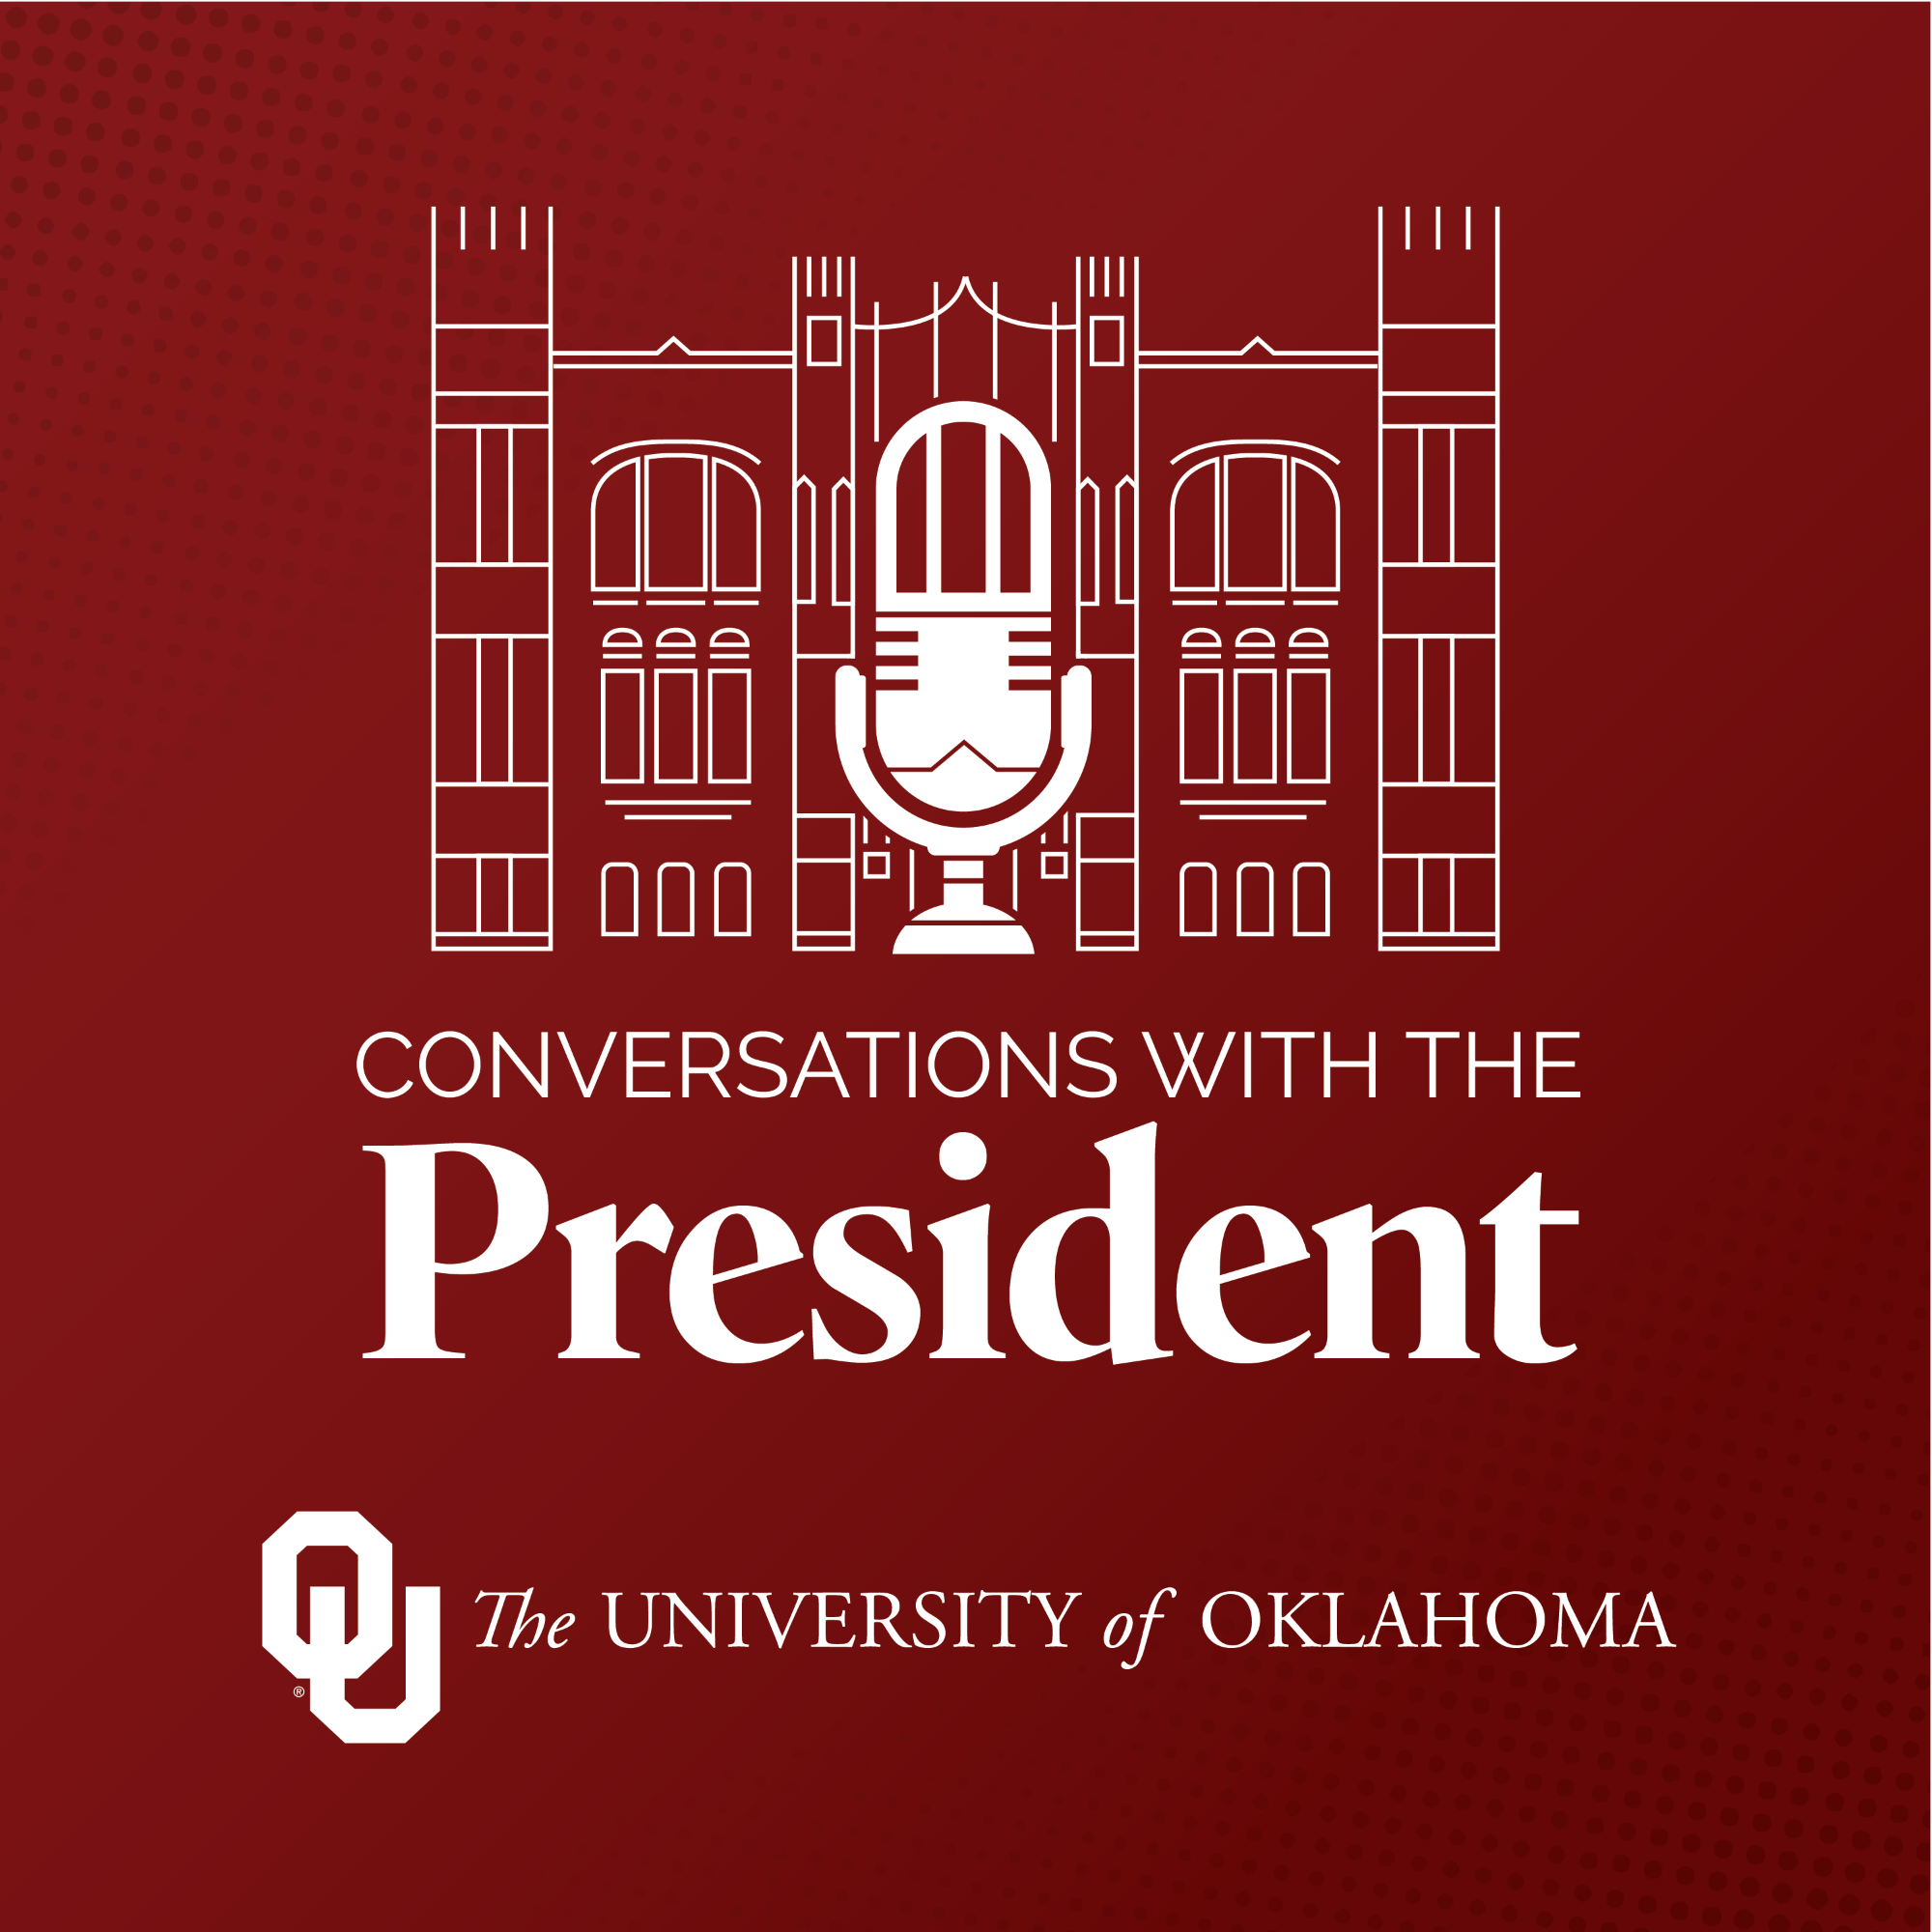 Conversations with the President. Interlocking OU, The University of Oklahoma.